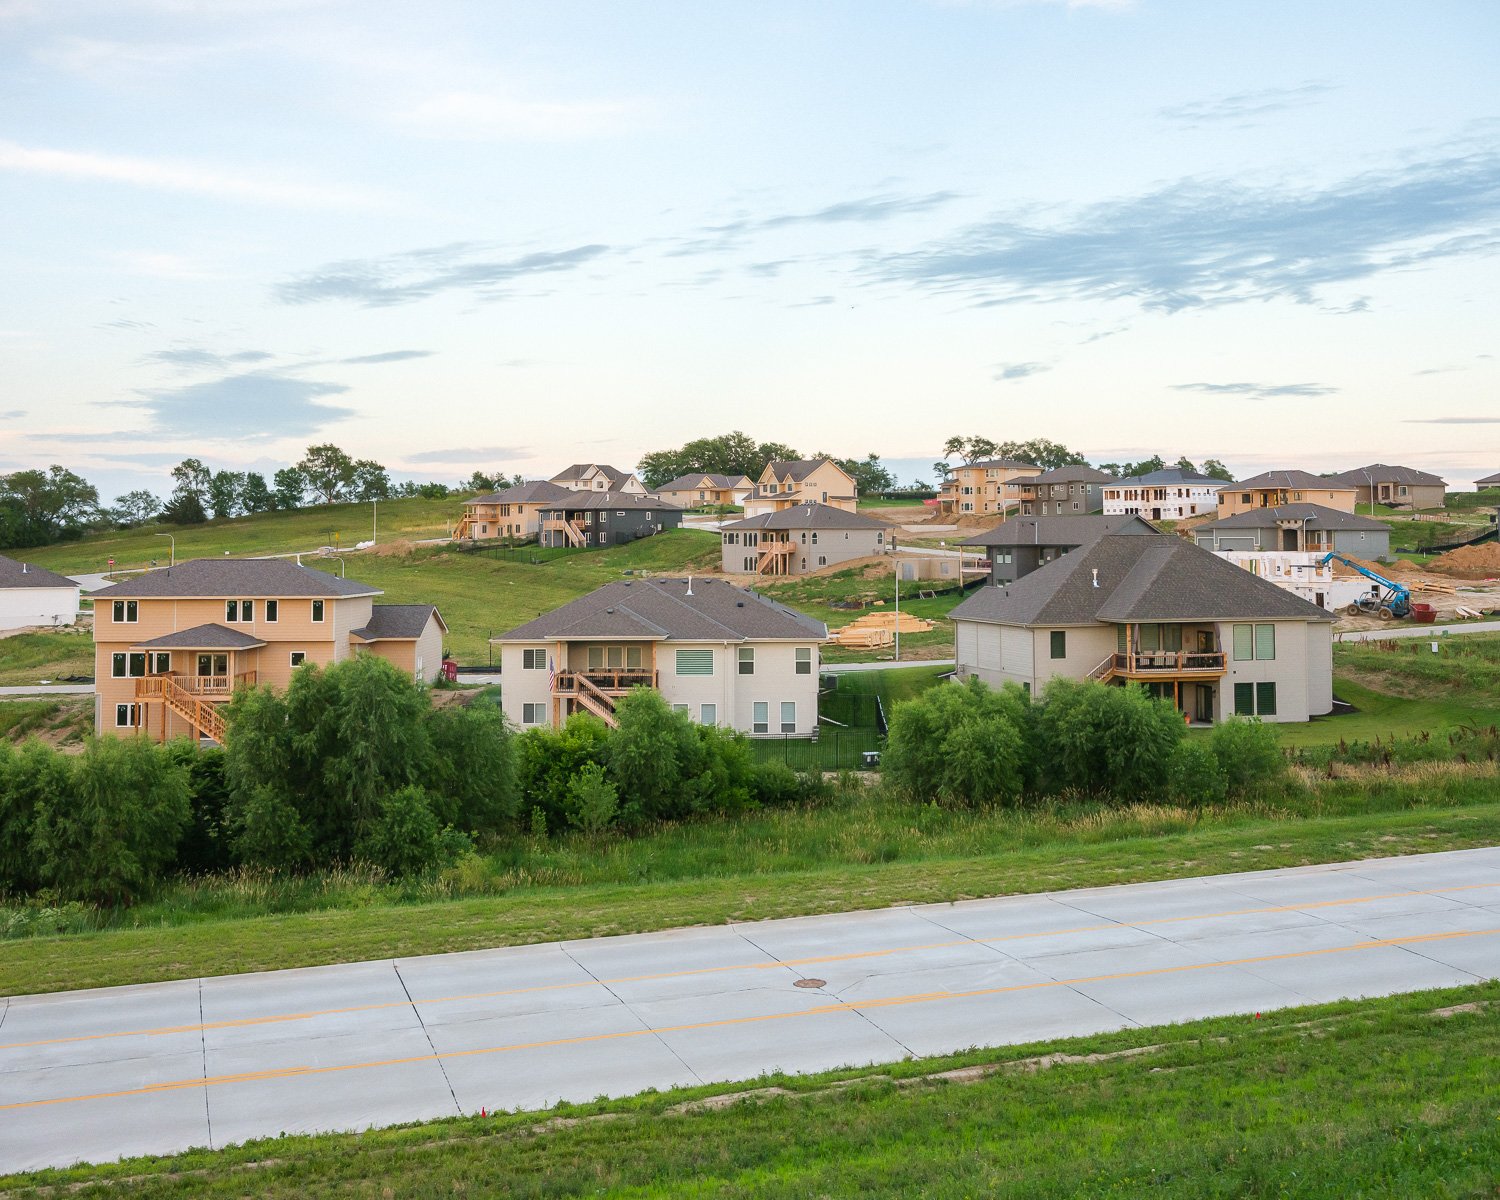  New home construction in Papillion, NE, for The New York Times, 2021 